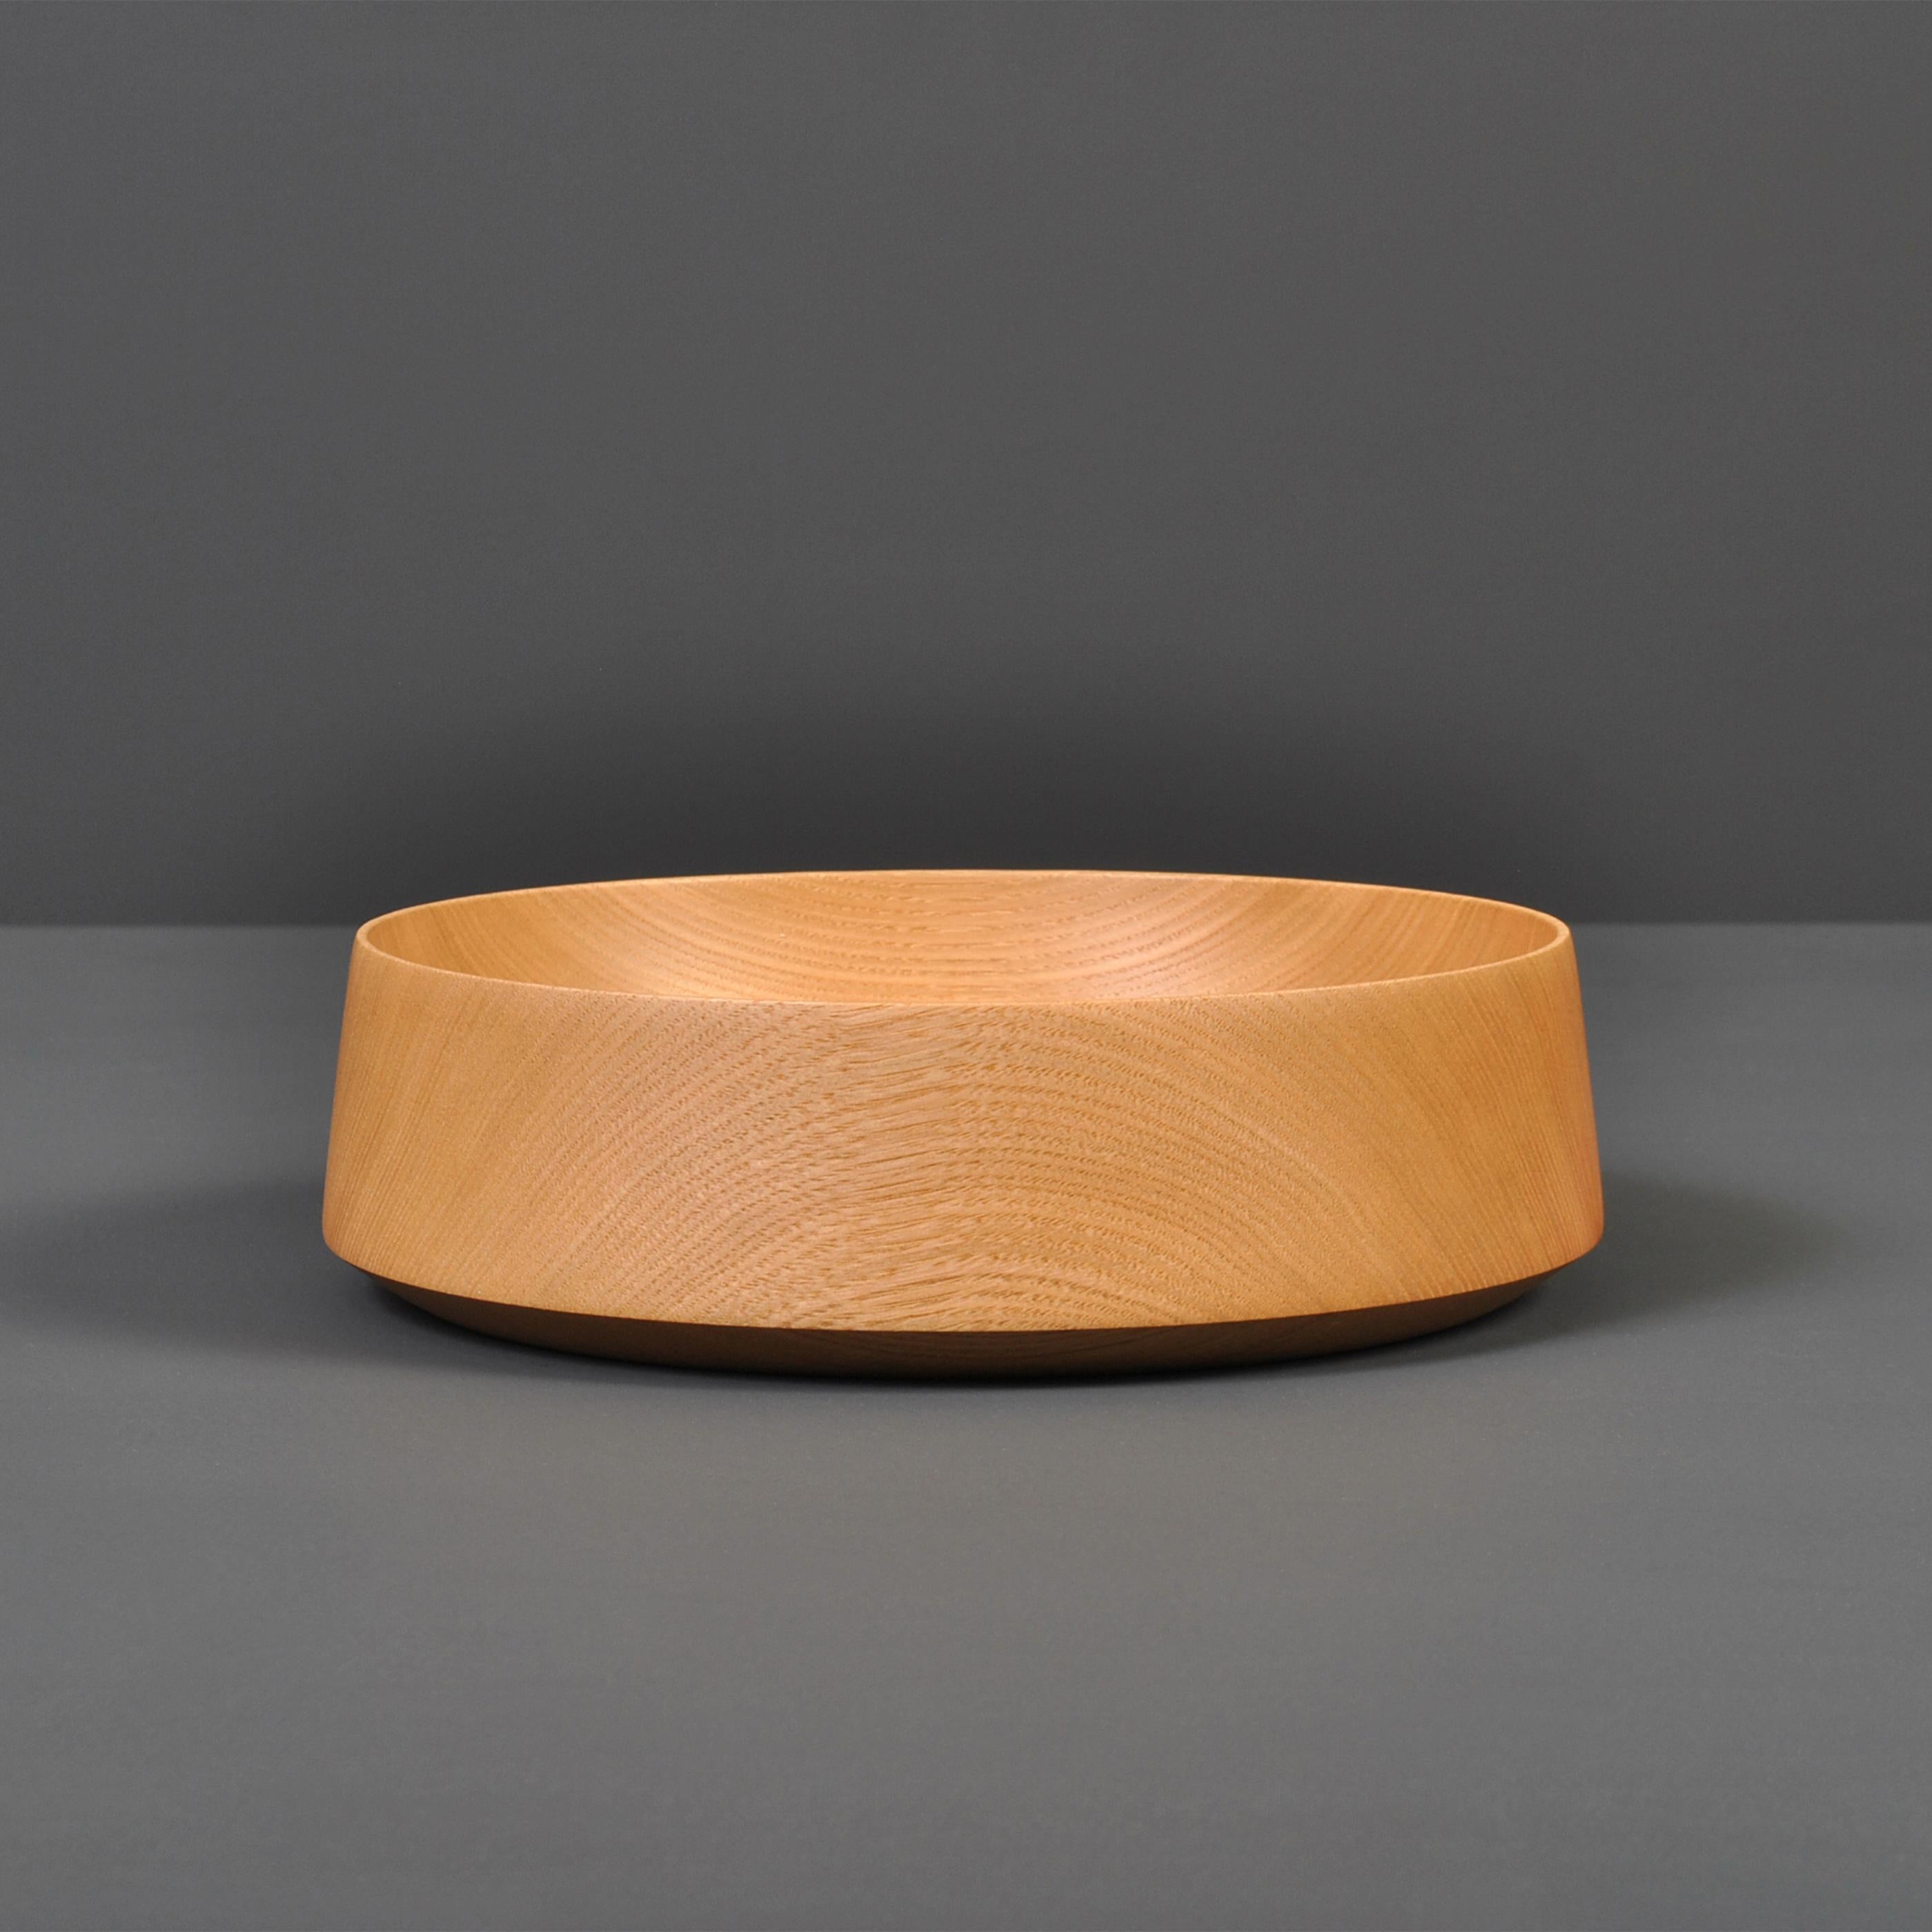 Fine traditionally hand-crafted and turned Chestnut platter - bowl. These are handmade to the very best quality in London.
Finished in food safe oils.
A beautiful piece of handmade contemporary design with a technique that dates back millennia. This